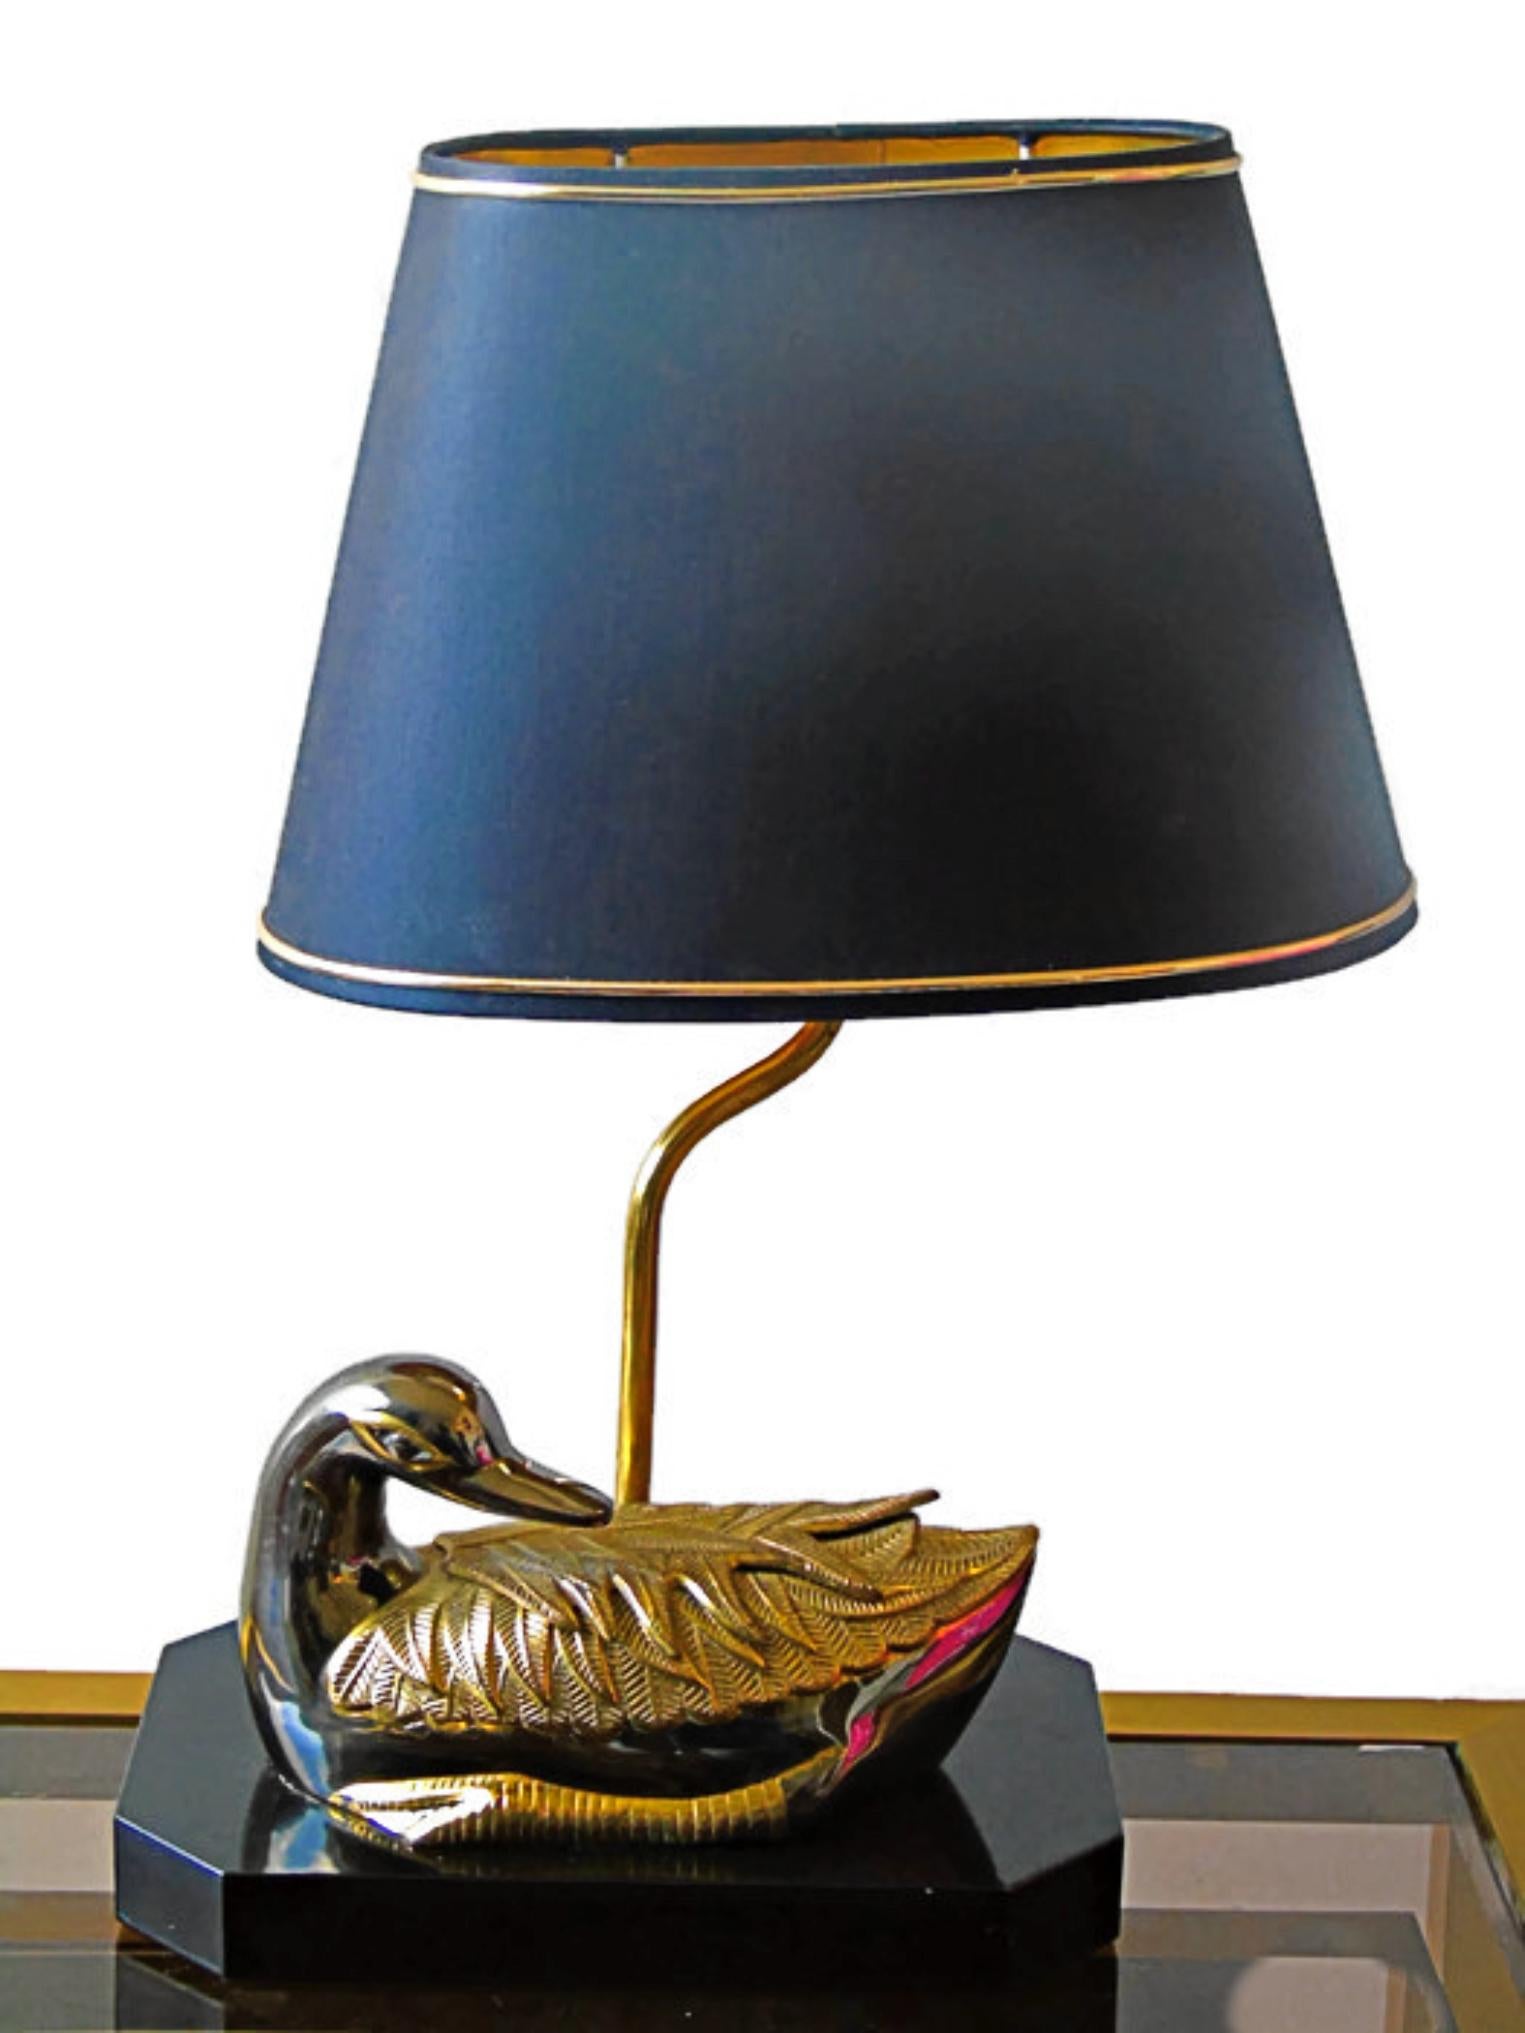 Maison Jansen style duck table lamp.

The duck is manufactured with eye for detail. 

The light has one lightpoint and comes with a black and gold shade.

Tested and ready for use with a regular E26/E27 light bulb.

France,